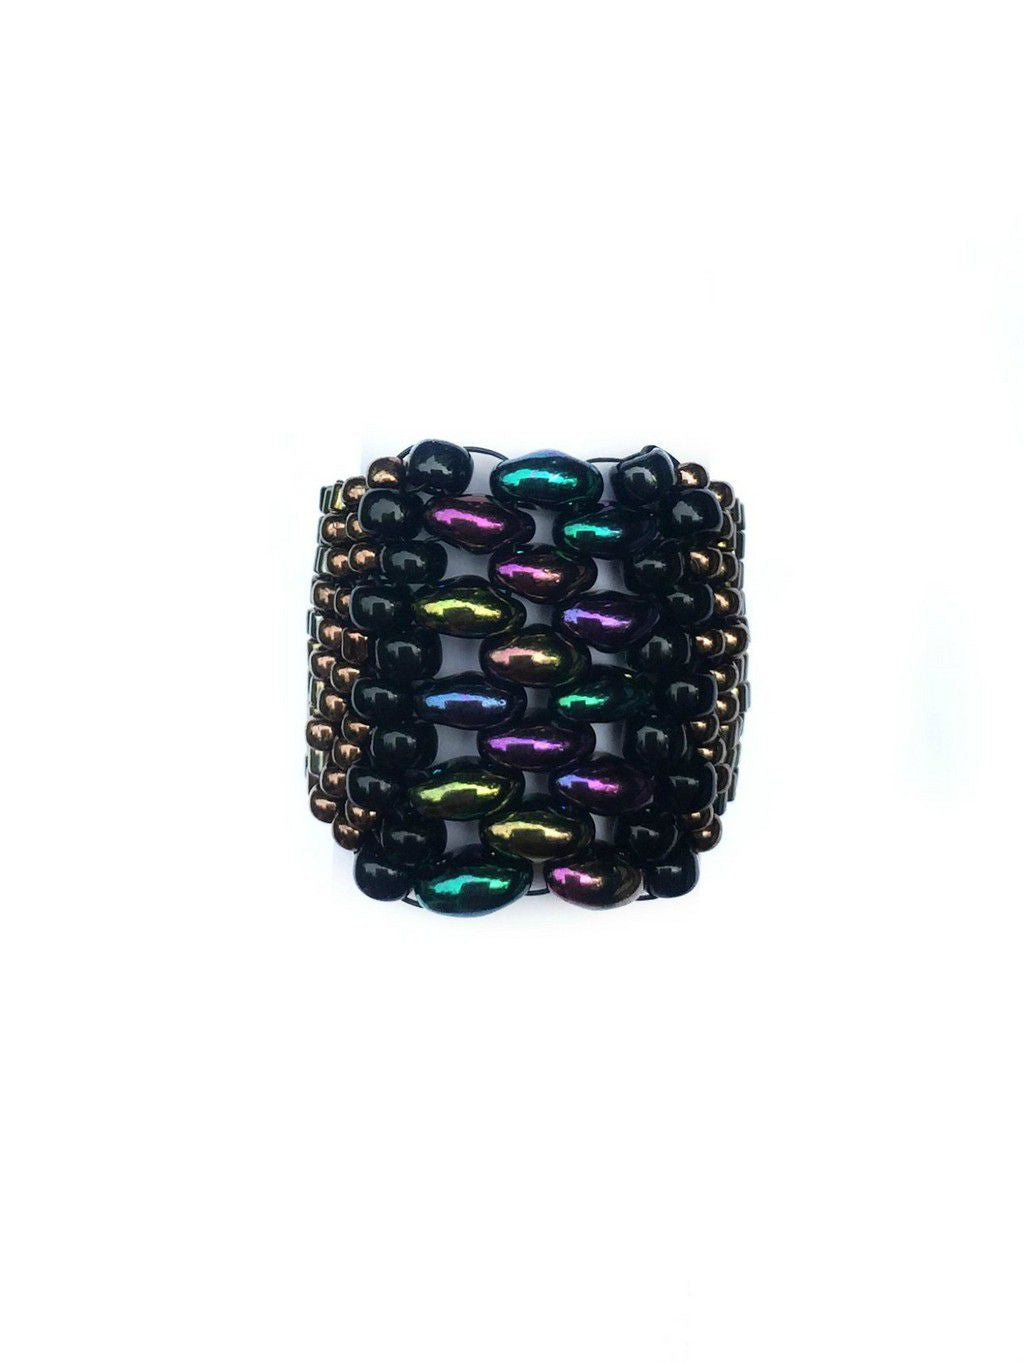 Beaded Bohemian Style Rings - 5 Color Options